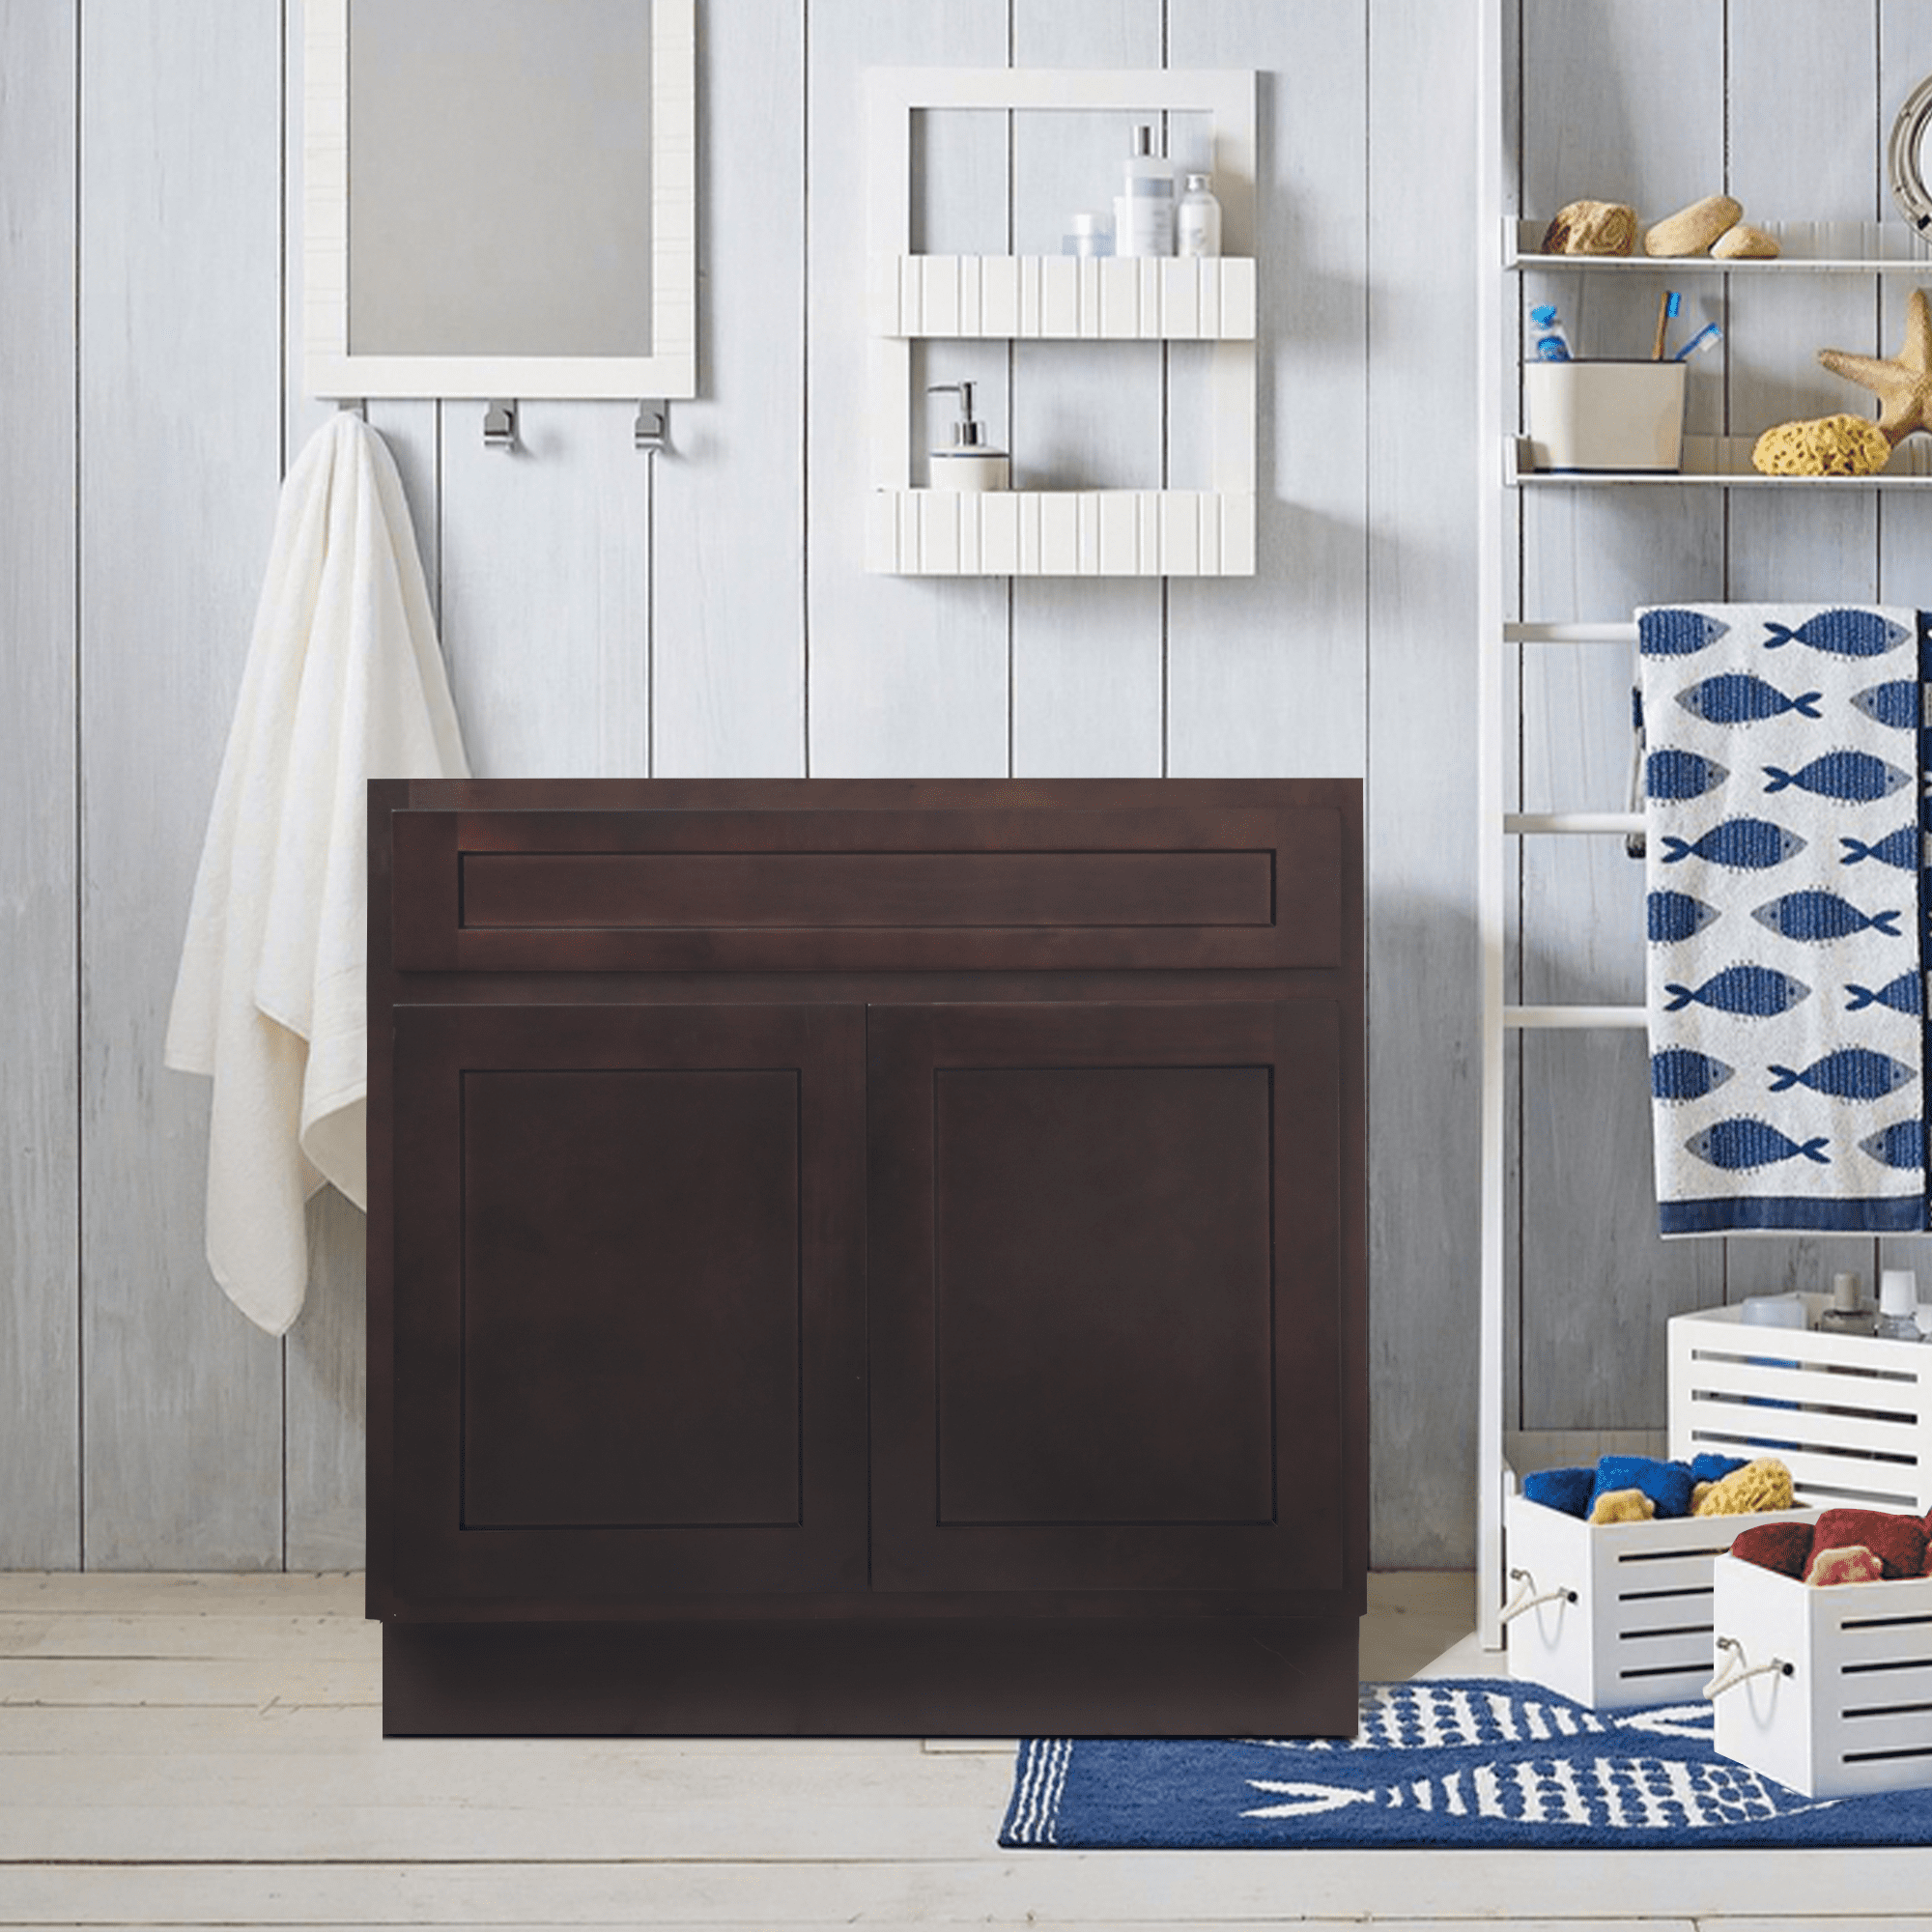 Vanity Art 30 Inches Bathroom Cabinet Solid Wood Modern Storage Floor With Double Shutter Doors Brown Finish Va4030 B Com - 30 Inch Unfinished Bathroom Vanity Base Cabinet With Drawers